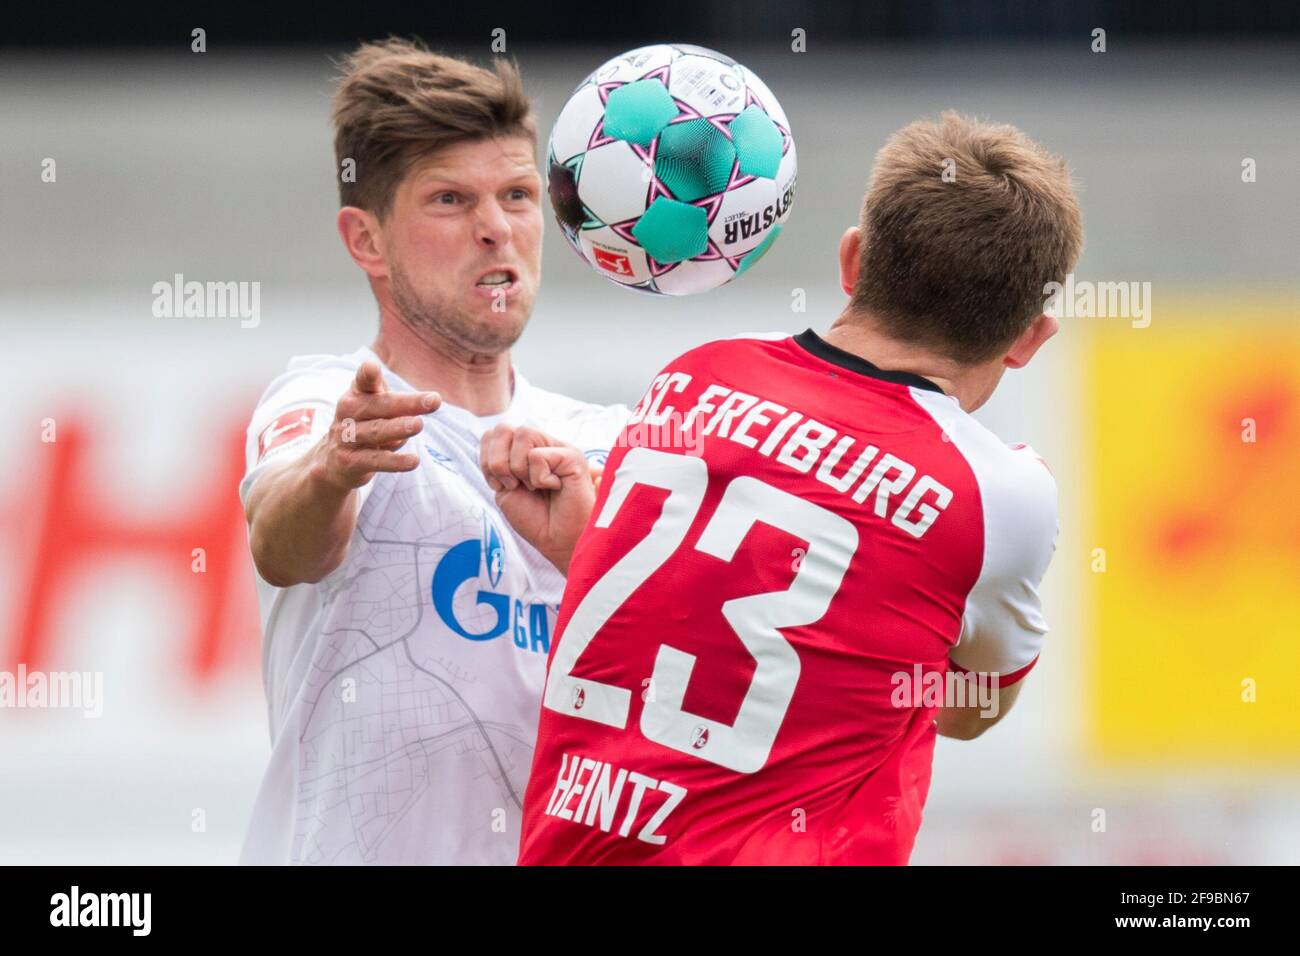 Freiburg Im Breisgau, Germany. 17th Apr, 2021. Football: Bundesliga, SC Freiburg - FC Schalke 04, Matchday 29 at Schwarzwald-Stadion. Schalke's Klaas-Jan Huntelaar (l) in action against Freiburg's Dominique Heintz (r). Credit: Tom Weller/dpa - IMPORTANT NOTE: In accordance with the regulations of the DFL Deutsche Fußball Liga and/or the DFB Deutscher Fußball-Bund, it is prohibited to use or have used photographs taken in the stadium and/or of the match in the form of sequence pictures and/or video-like photo series./dpa/Alamy Live News Stock Photo